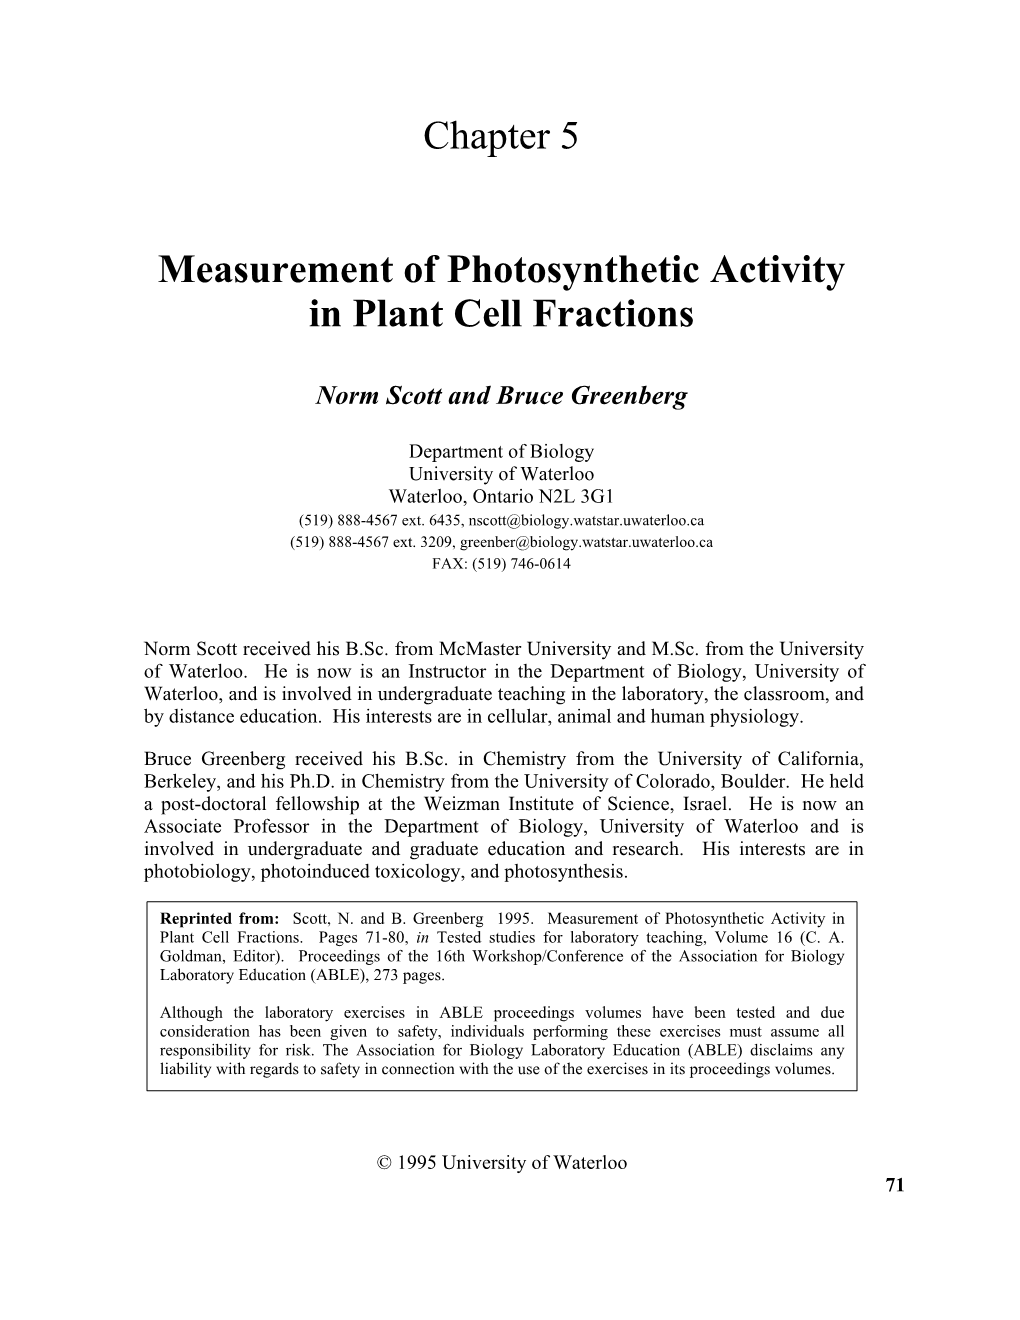 Chapter 5 Measurement of Photosynthetic Activity in Plant Cell